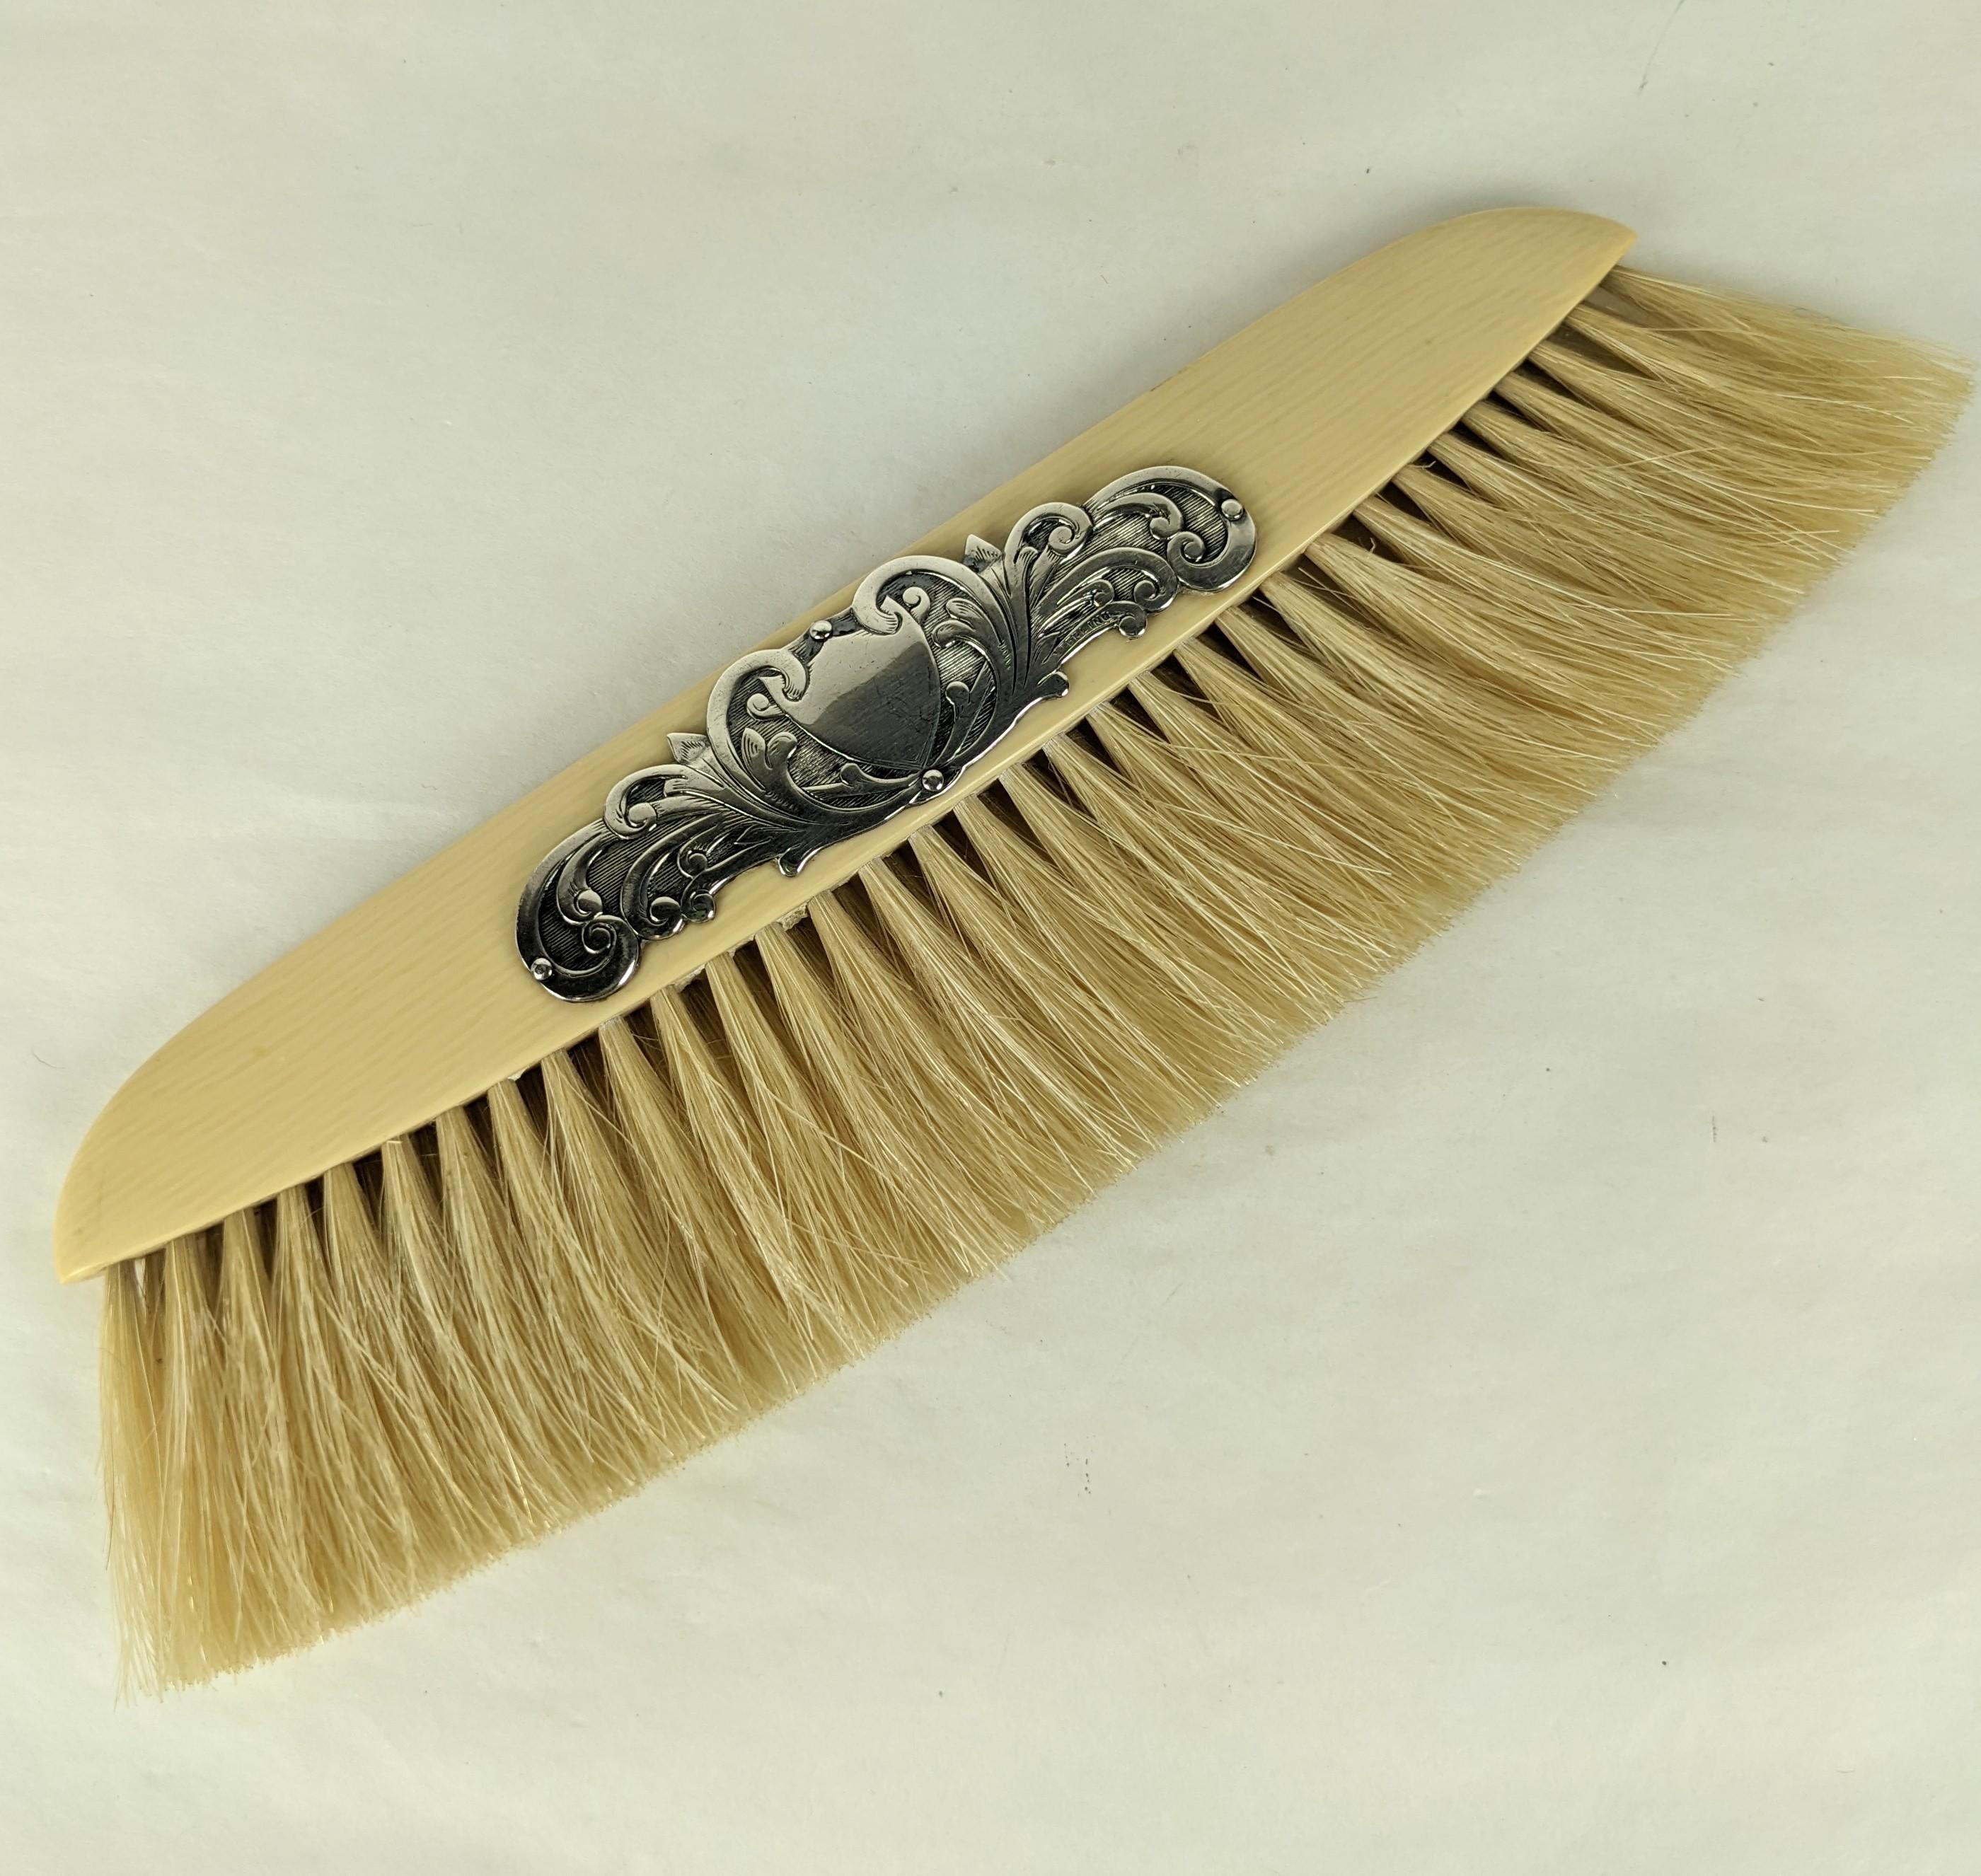 https://a.1stdibscdn.com/edwardian-table-crumb-brush-for-sale-picture-2/f_12972/f_296840521658451909535/PXL_20220721_173828644_2_master.jpg